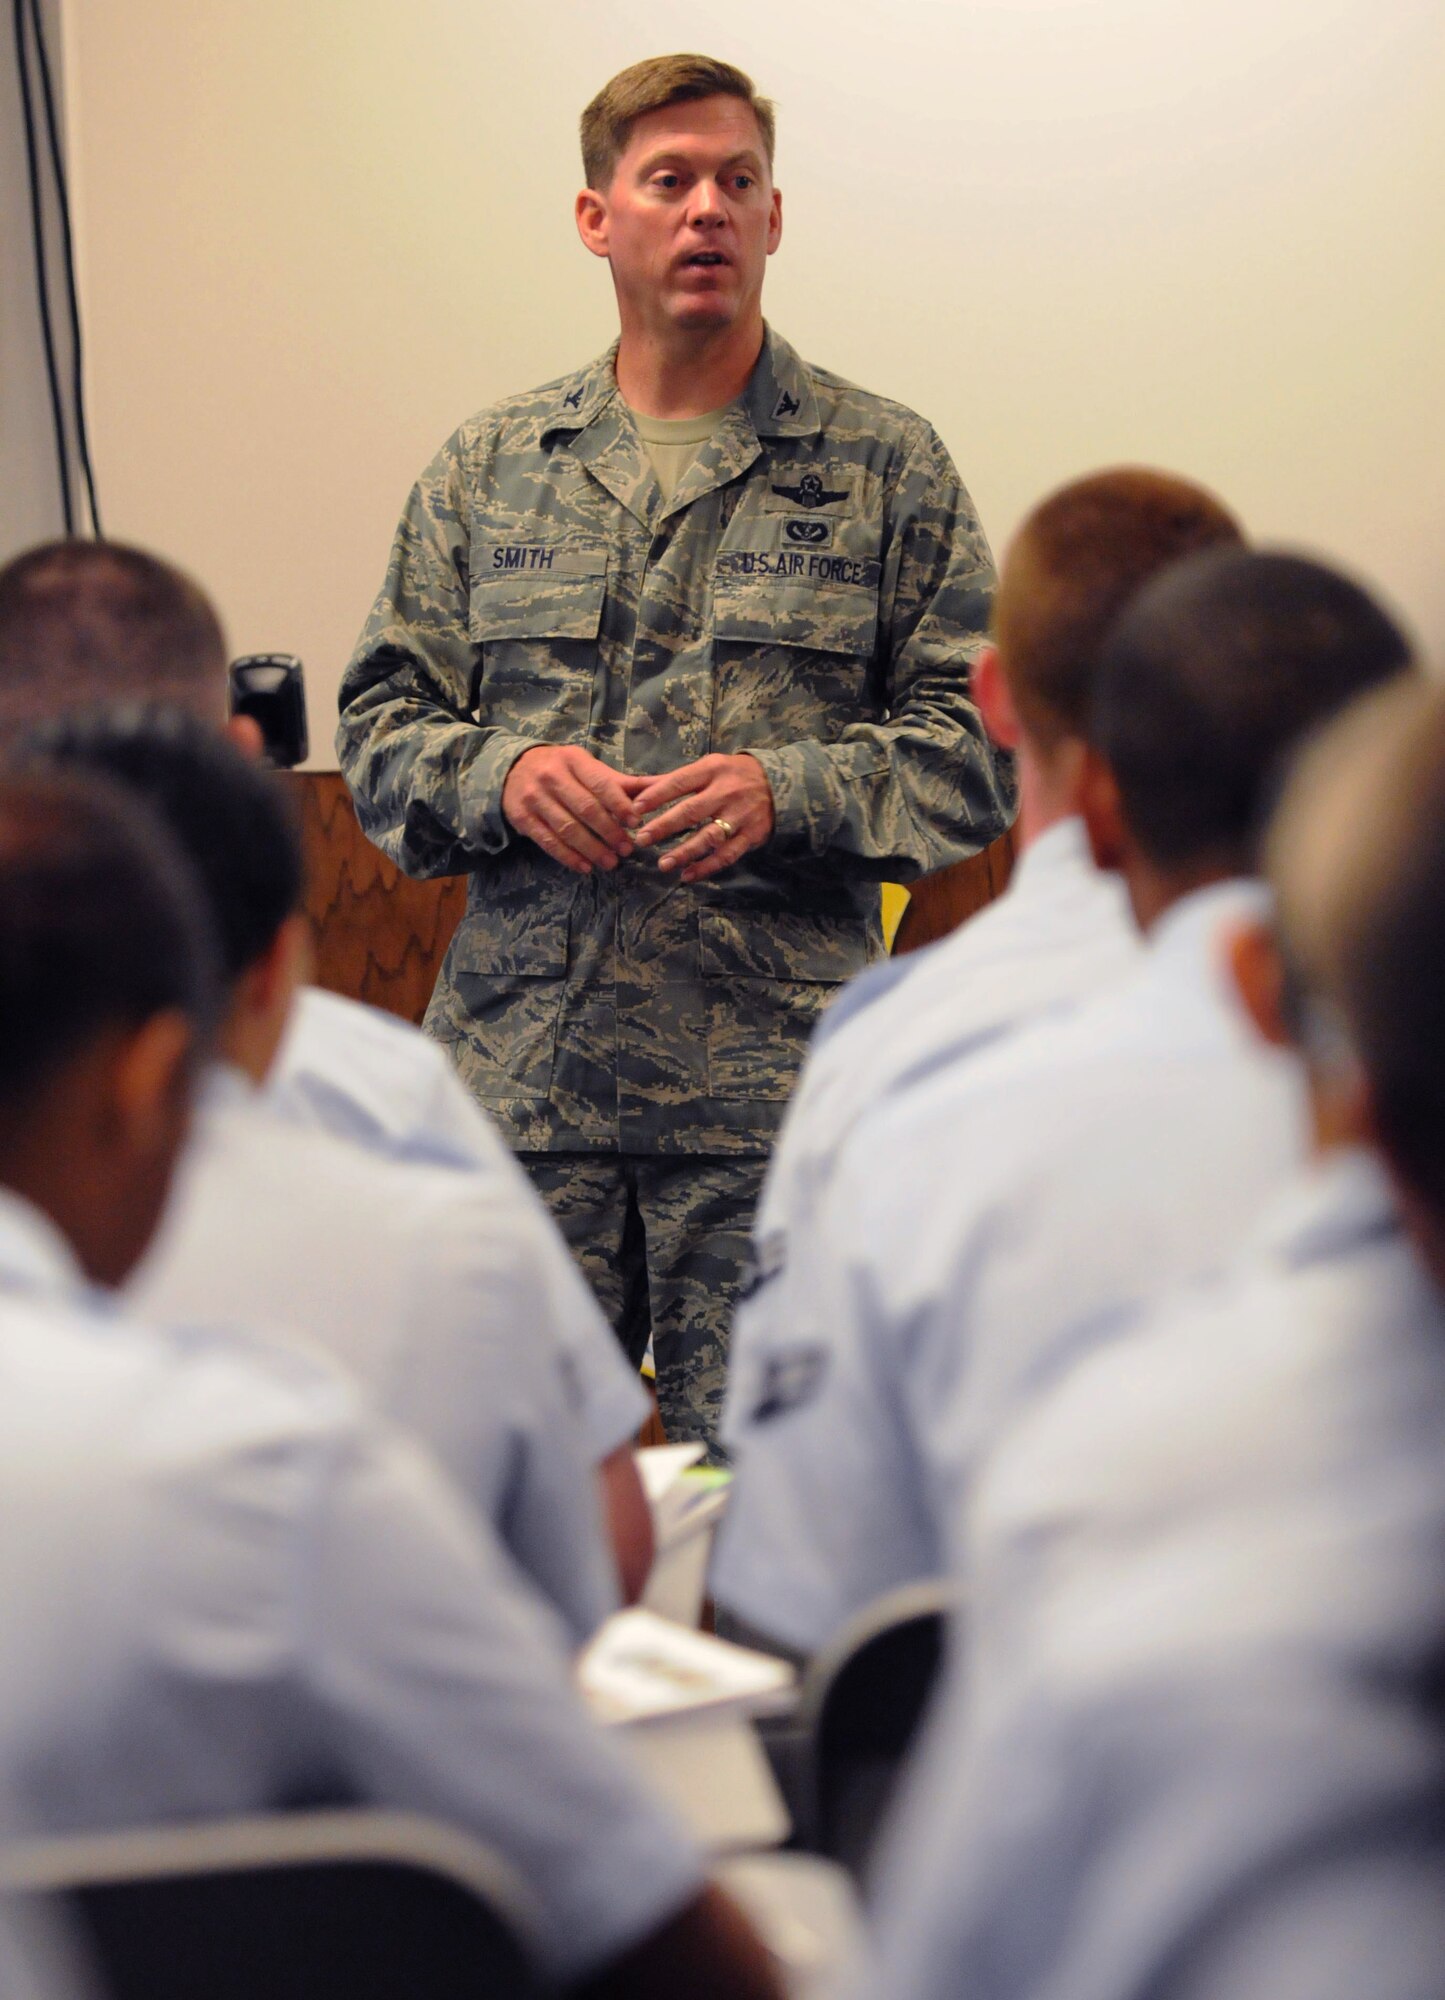 Col. C. Mike Smith, 81st Training Wing vice commander, welcomes non-prior service Airmen to Keesler during their in-processing at the Levitow Training Support Facility July 2, 2016, on Keesler Air Force Base, Miss. Base leadership welcomes the new Airmen every Tuesday upon their arrival from enlisted basic military training at Lackland Air Force Base, Texas. (U.S. Air Force photo by Kemberly Groue/Released) 